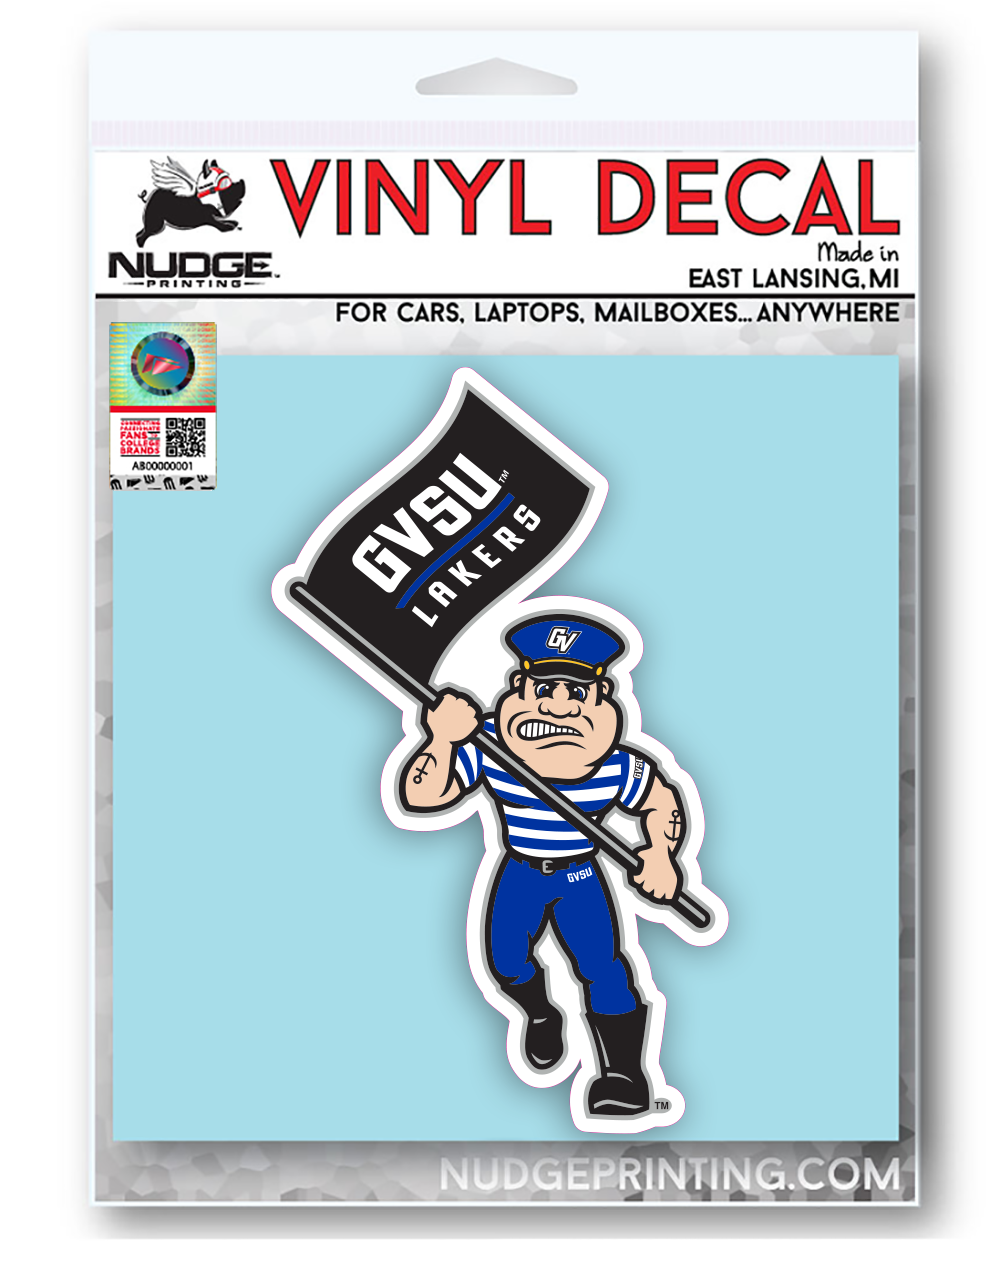 Grand Valley State University Lakers Running Louie the Laker Car Decal